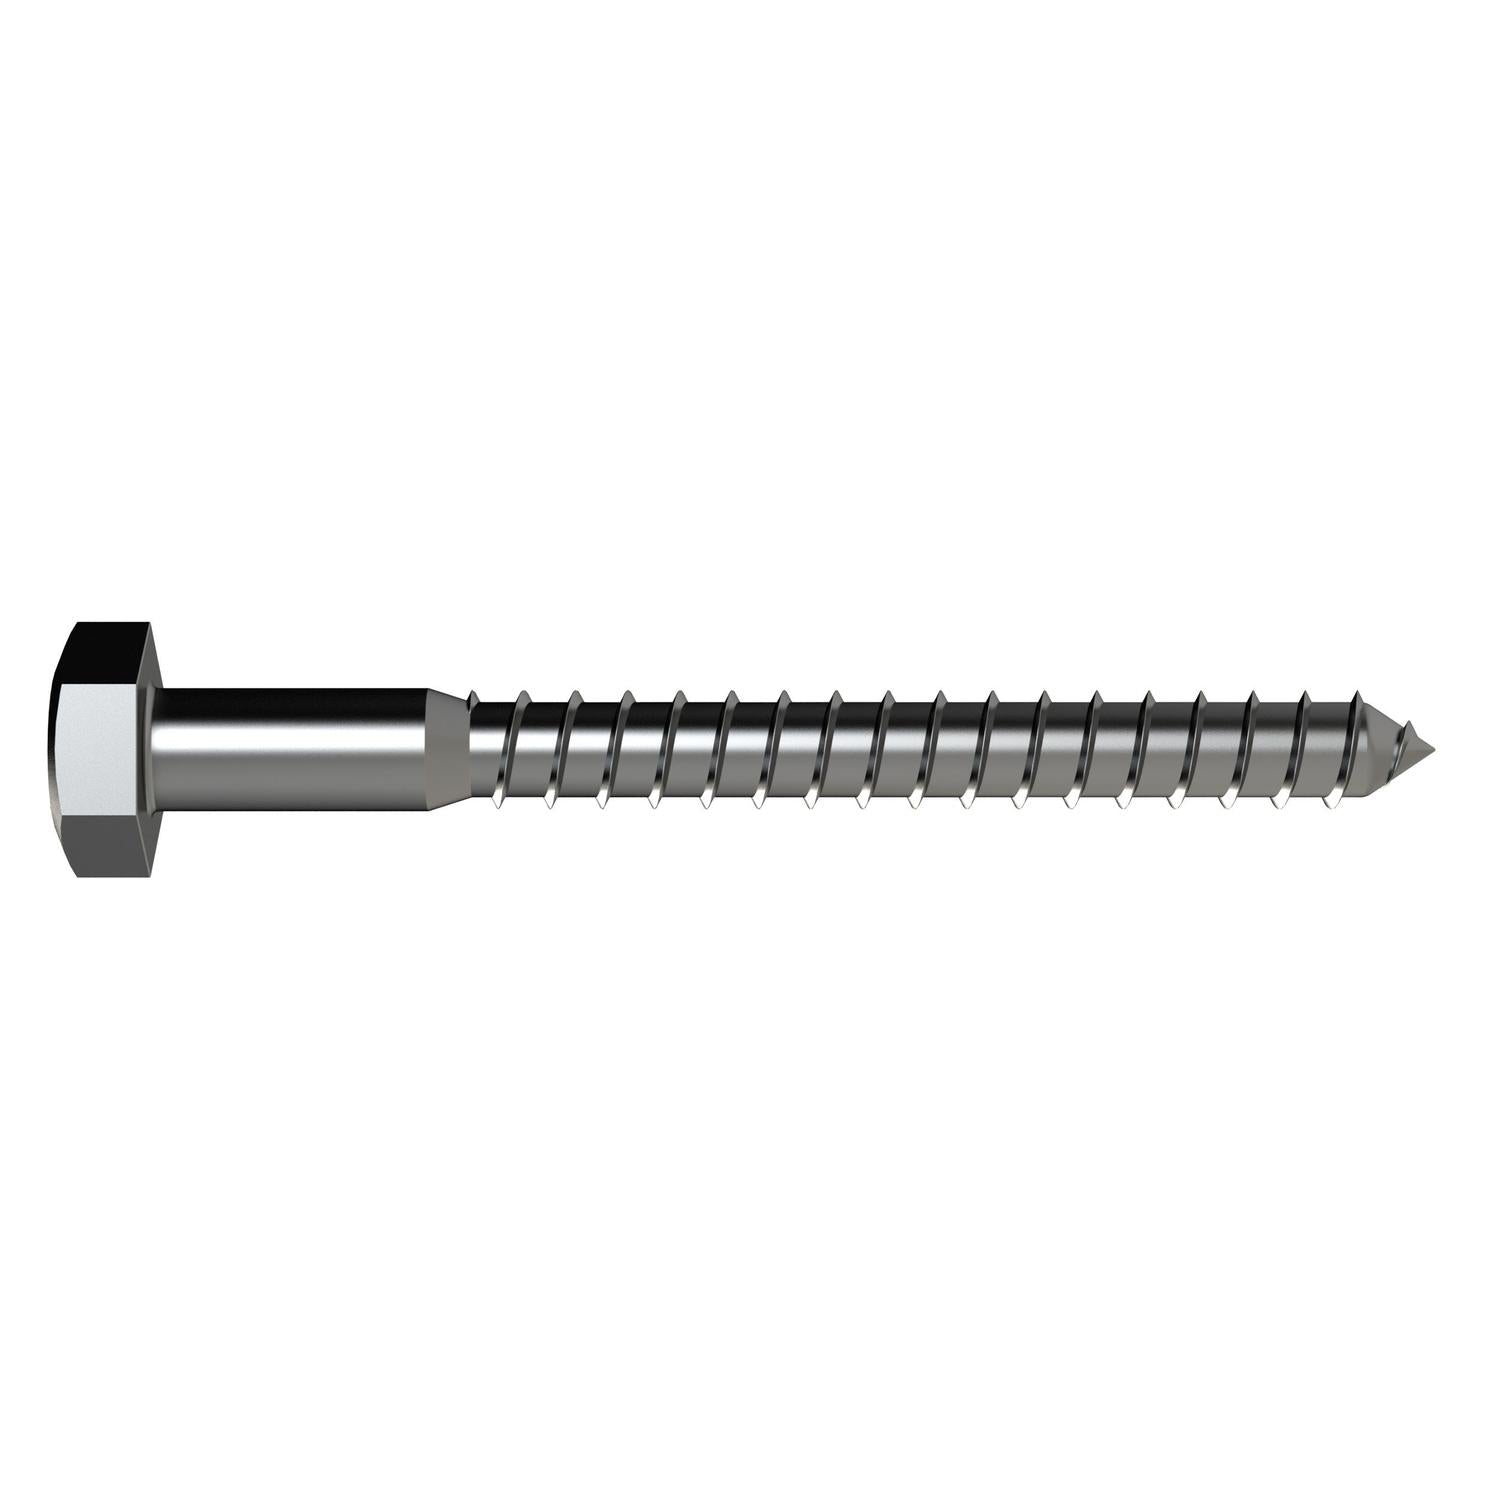 Bremick Coach Screw M12 X 200Mm Stainless Steel